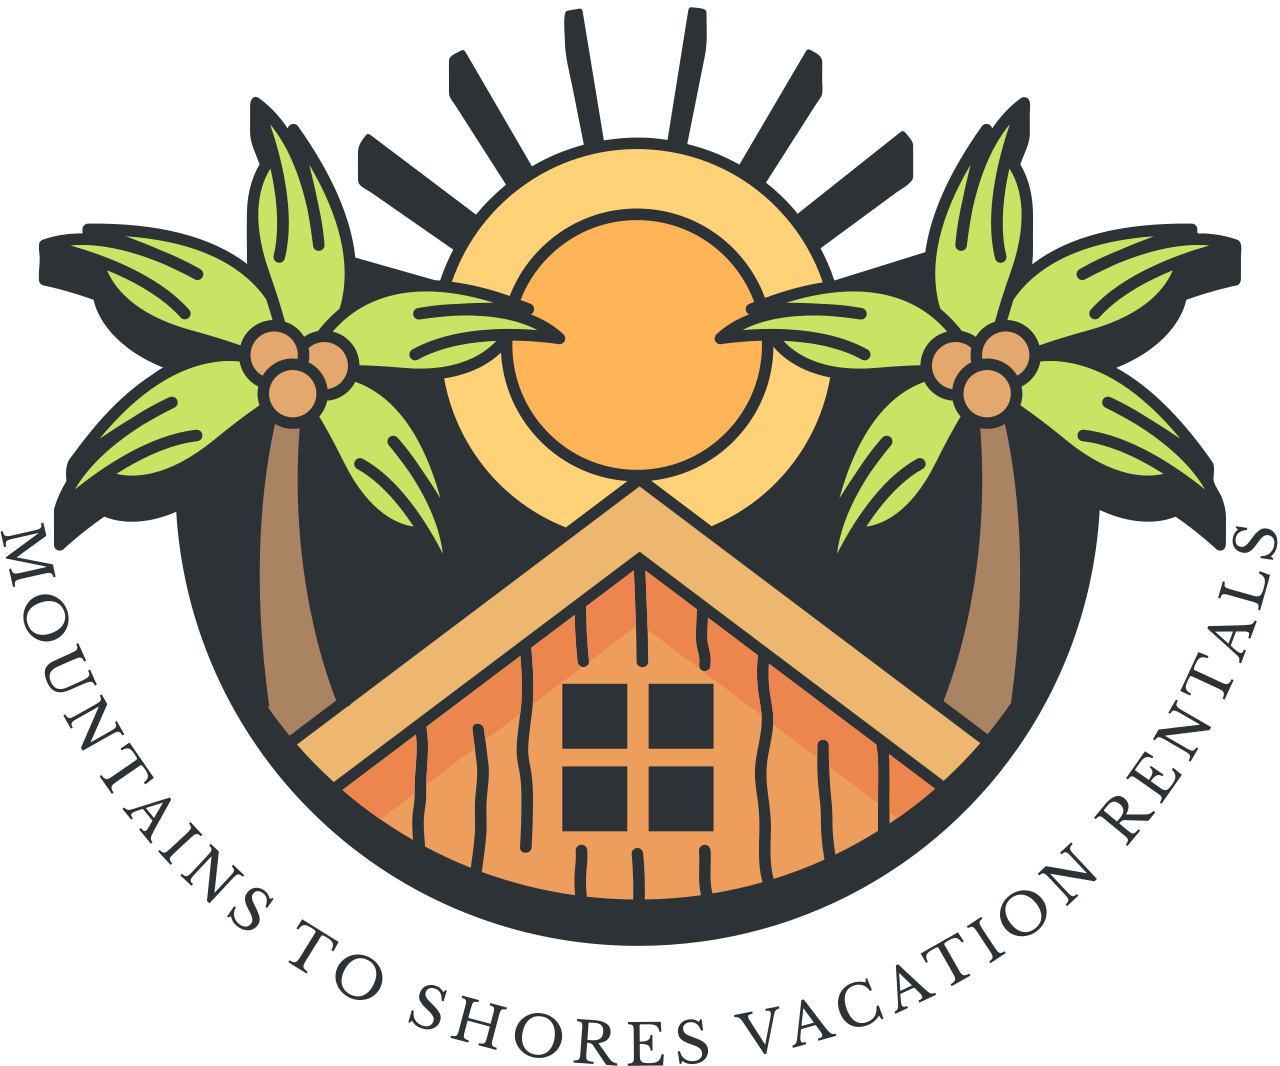 MOUNTAINS TO SHORES VACATION RENTALS's web page